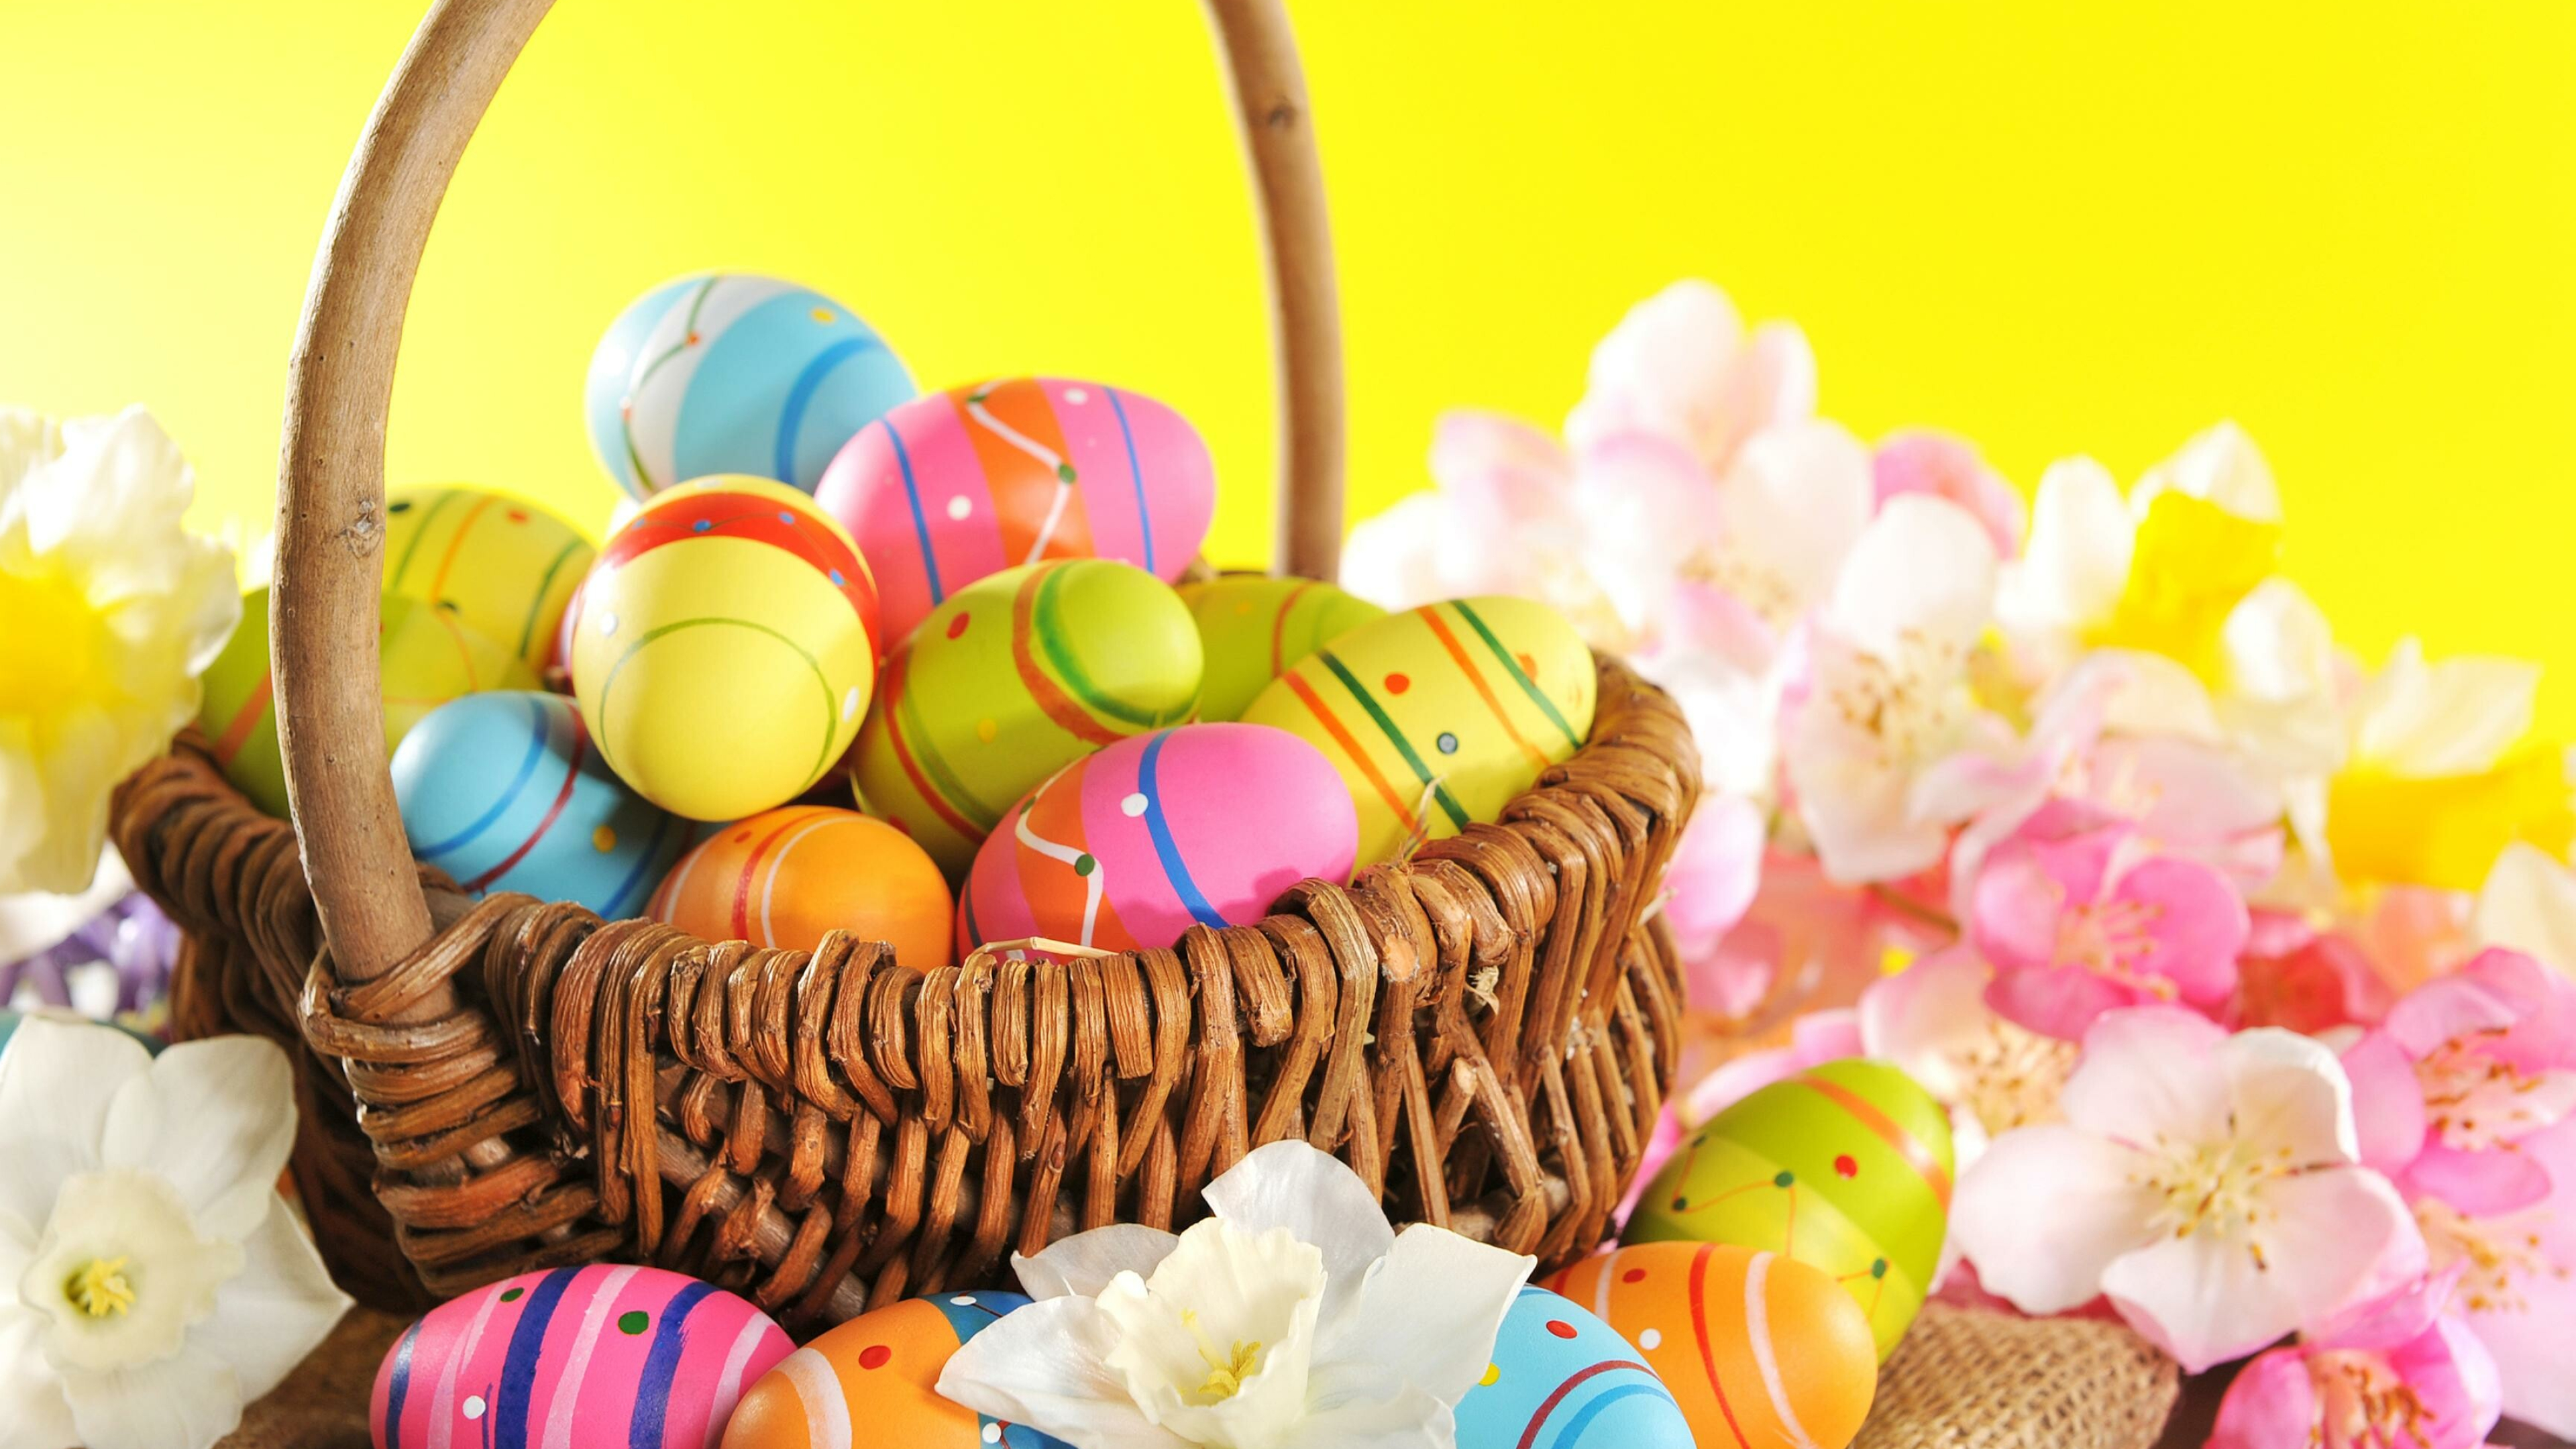 Easter: Its date is computed based on a lunisolar calendar similar to the Hebrew calendar. 3840x2160 4K Background.